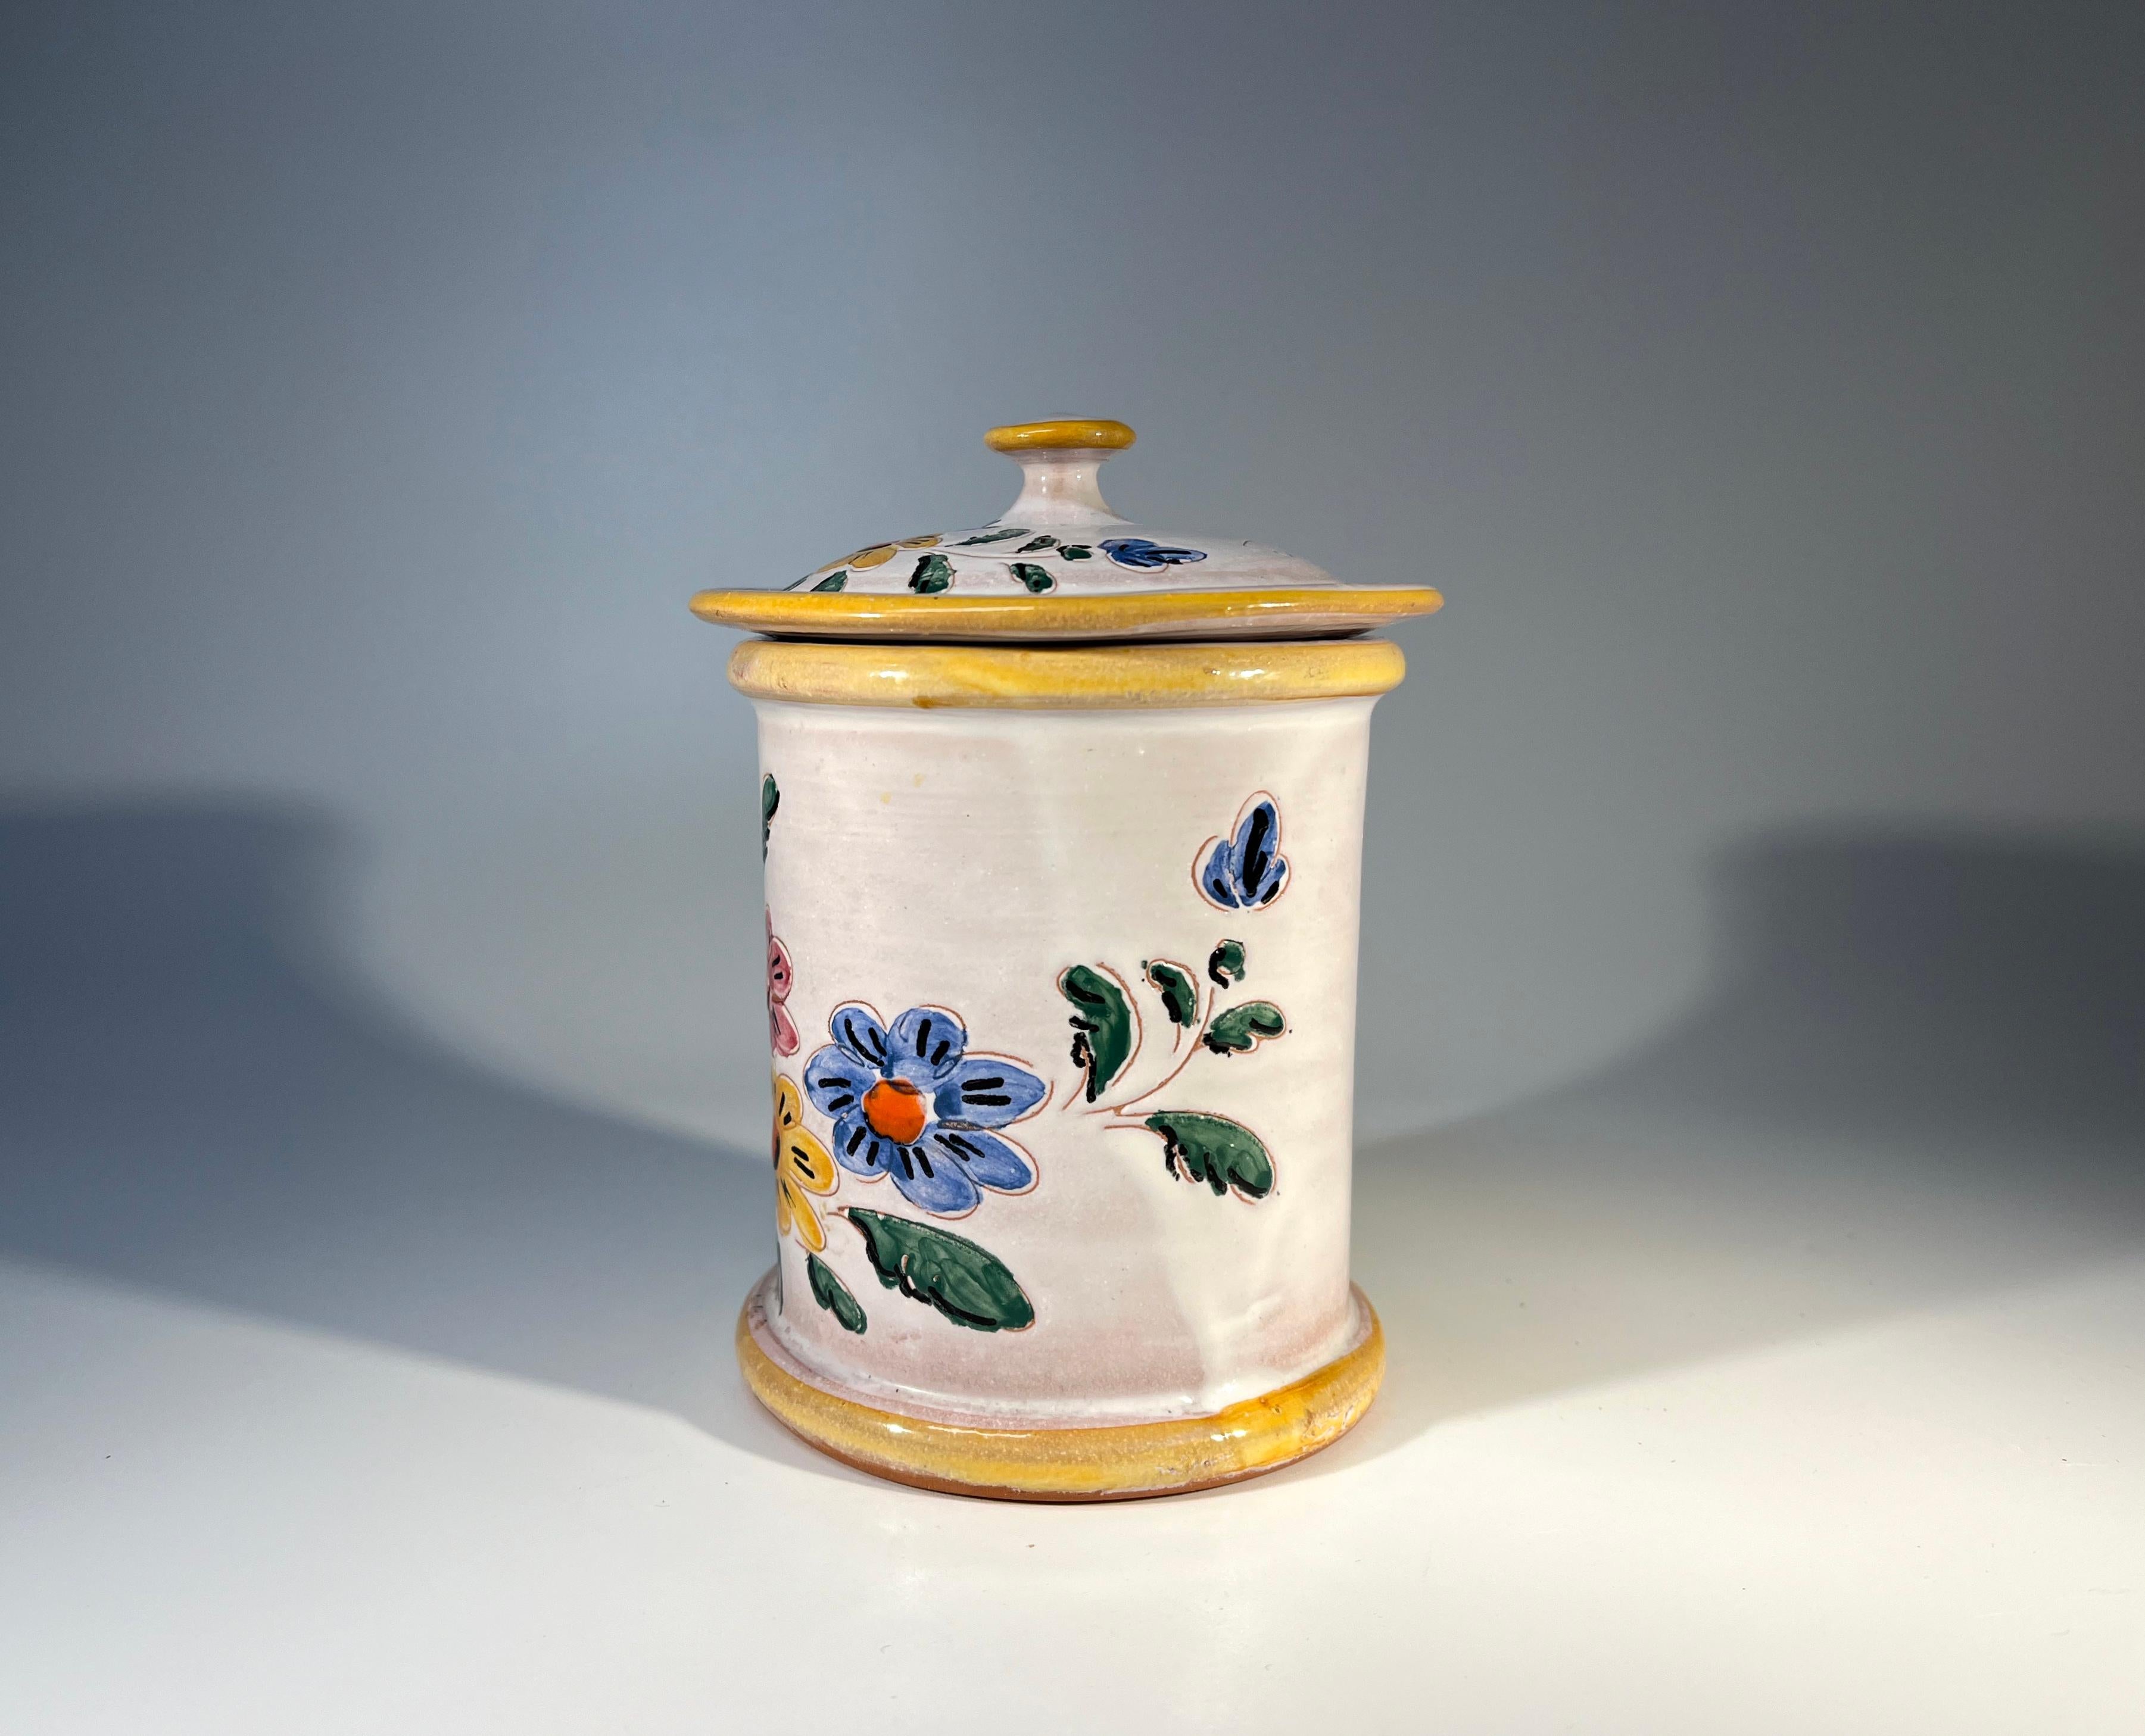 French Provincial, Floral Hand Painted Glazed Ceramic Tobacco Jar By Vallauris In Good Condition For Sale In Rothley, Leicestershire